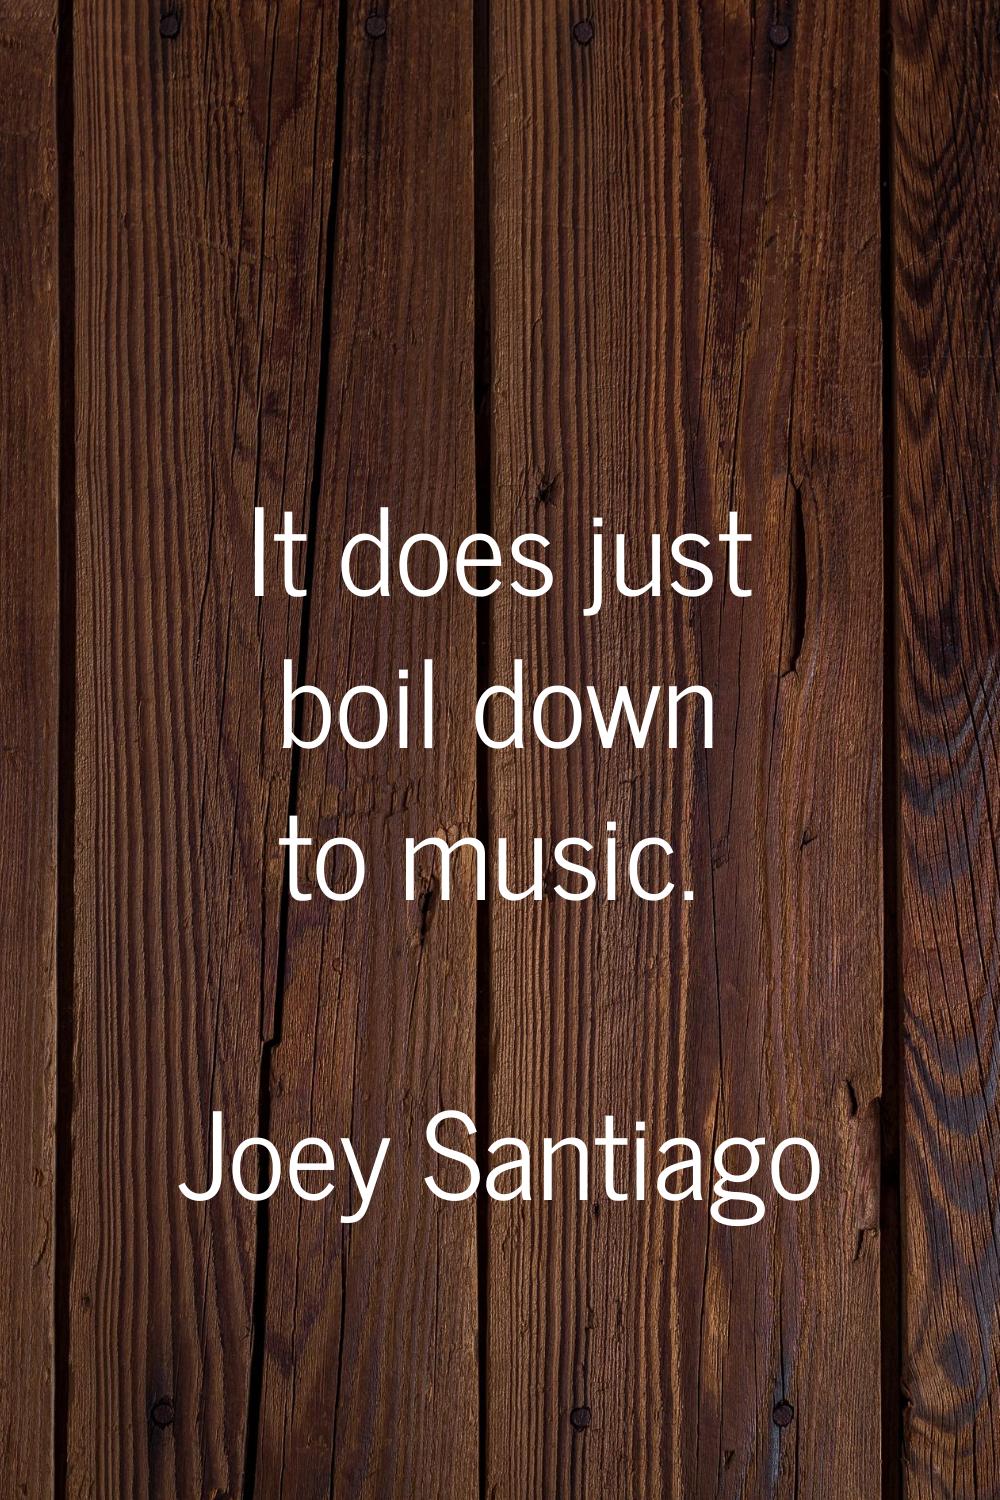 It does just boil down to music.